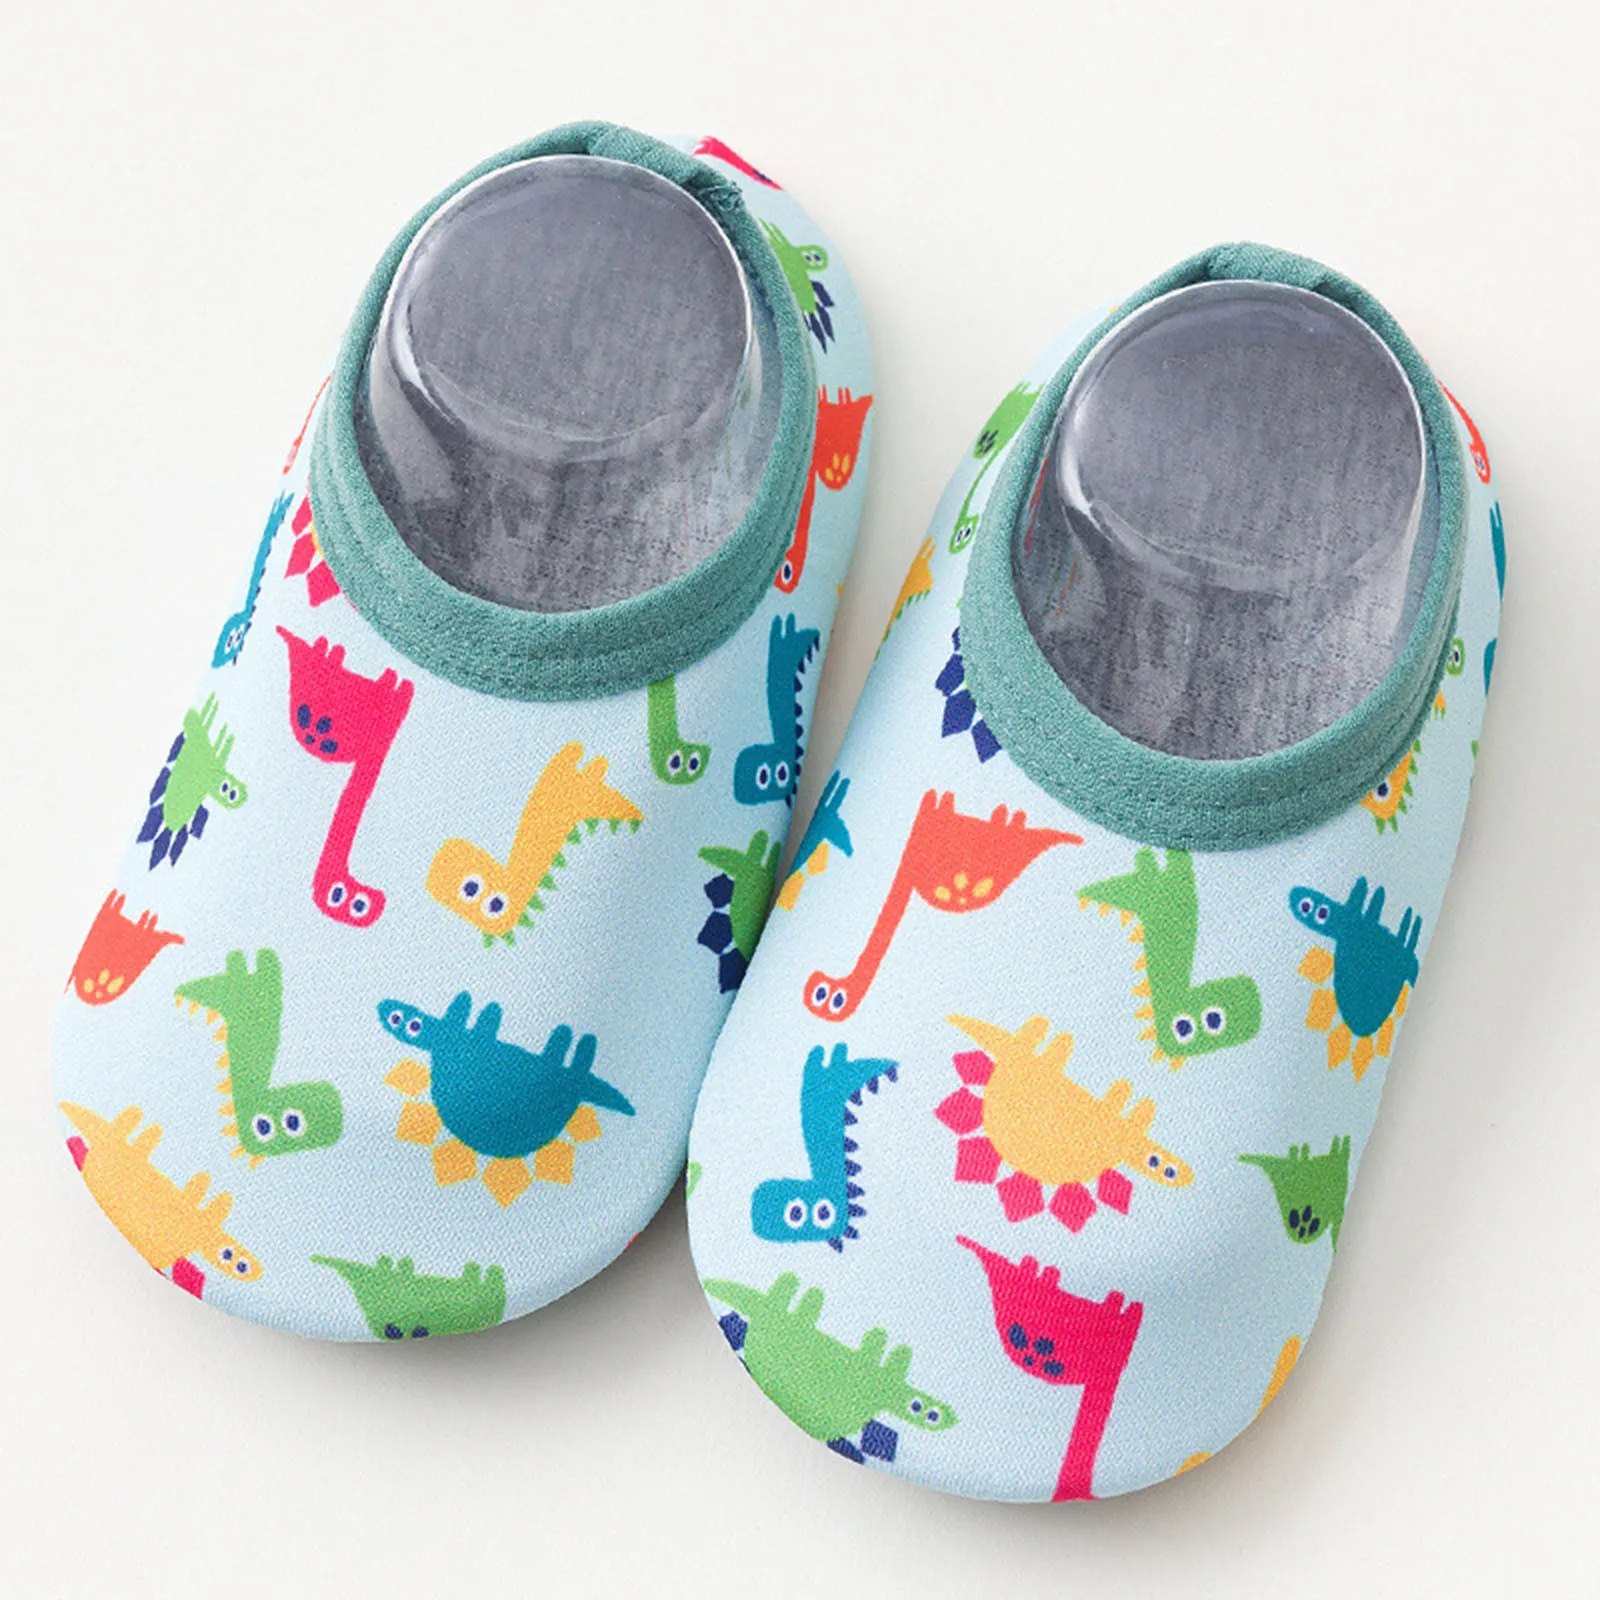 Baby Boys and Girls Swim Water Shoes Barefoot Aqua Socks Non-Slip for Beach Pool Toddler Kids Voberry Baby Shoes